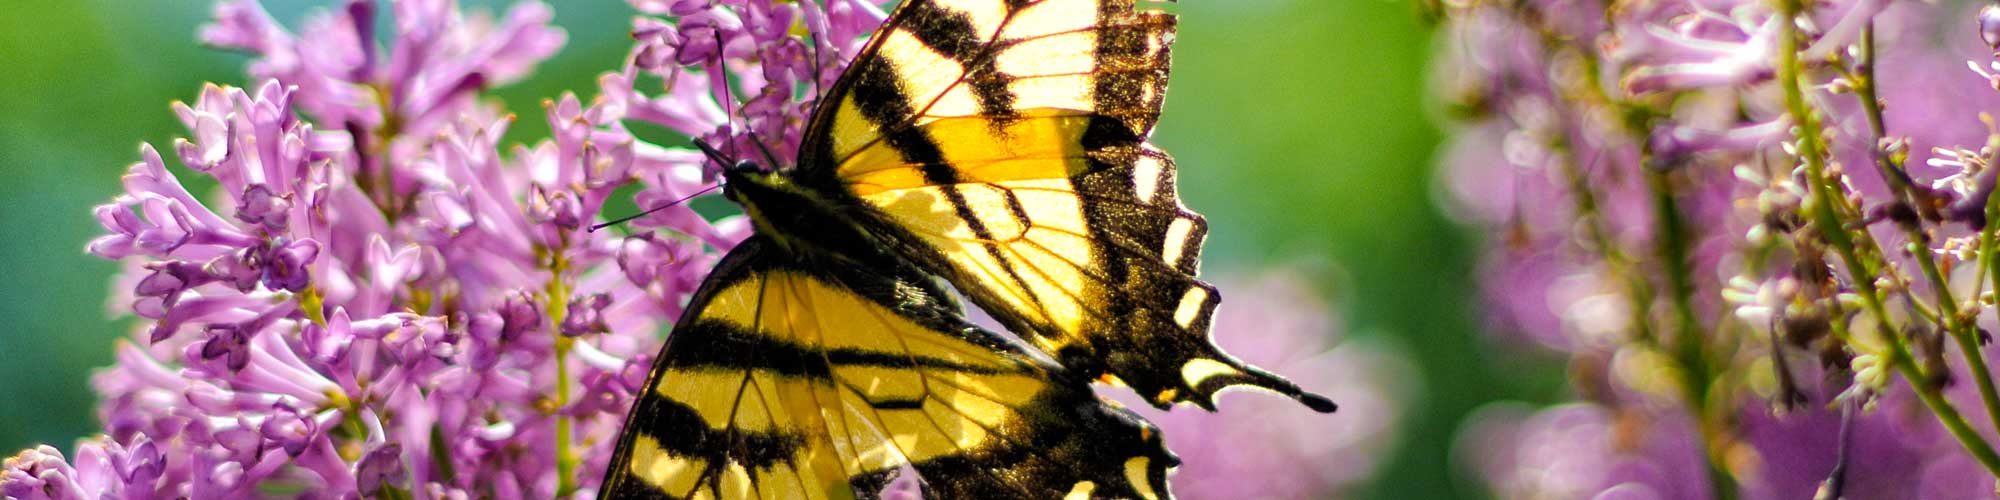 Swallowtail butterfly on lilacs